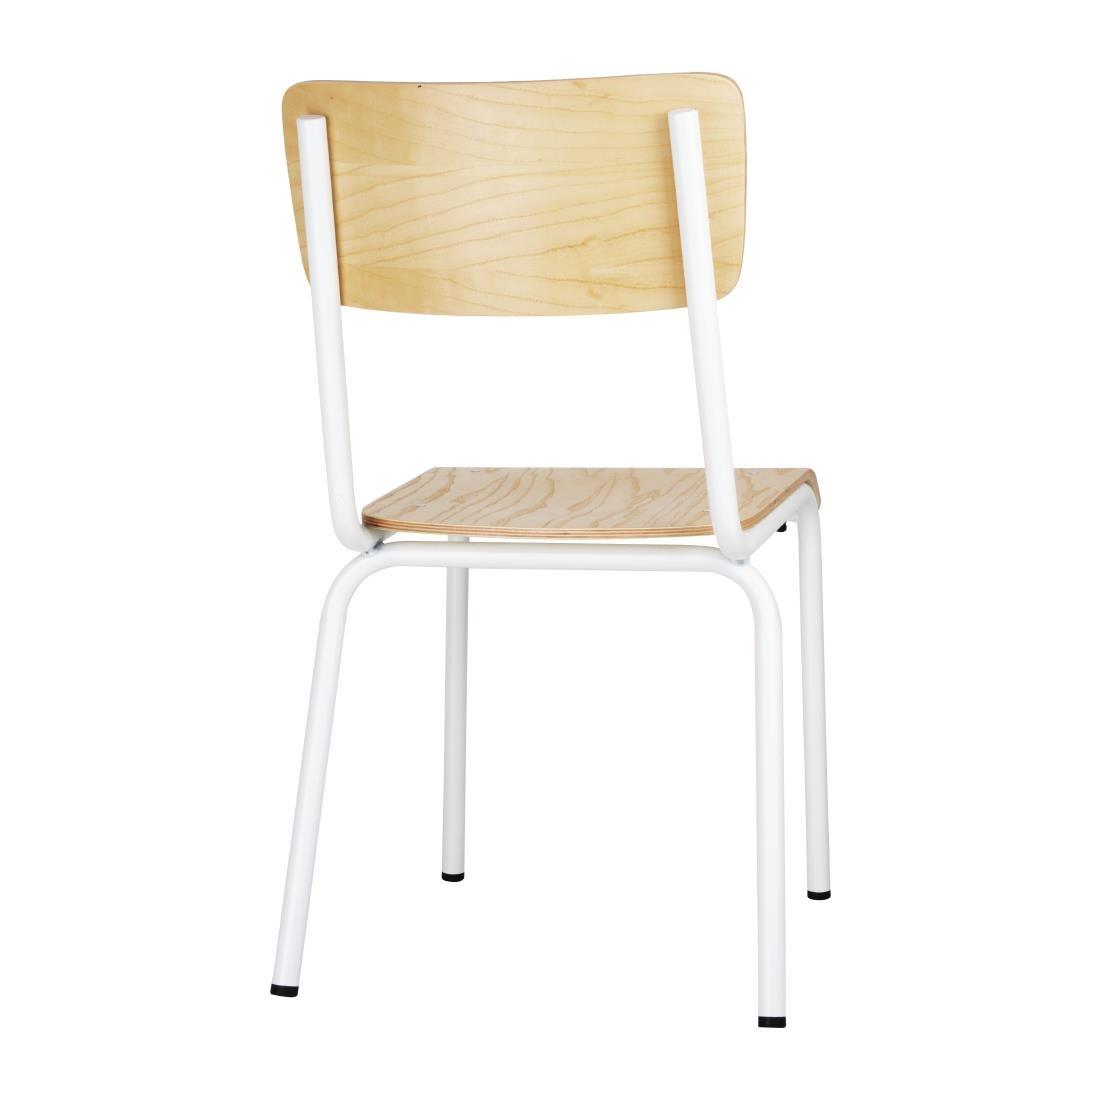 Bolero Cantina Side Chairs with Wooden Seat Pad and Backrest White (Pack of 4) - FB945  - 3